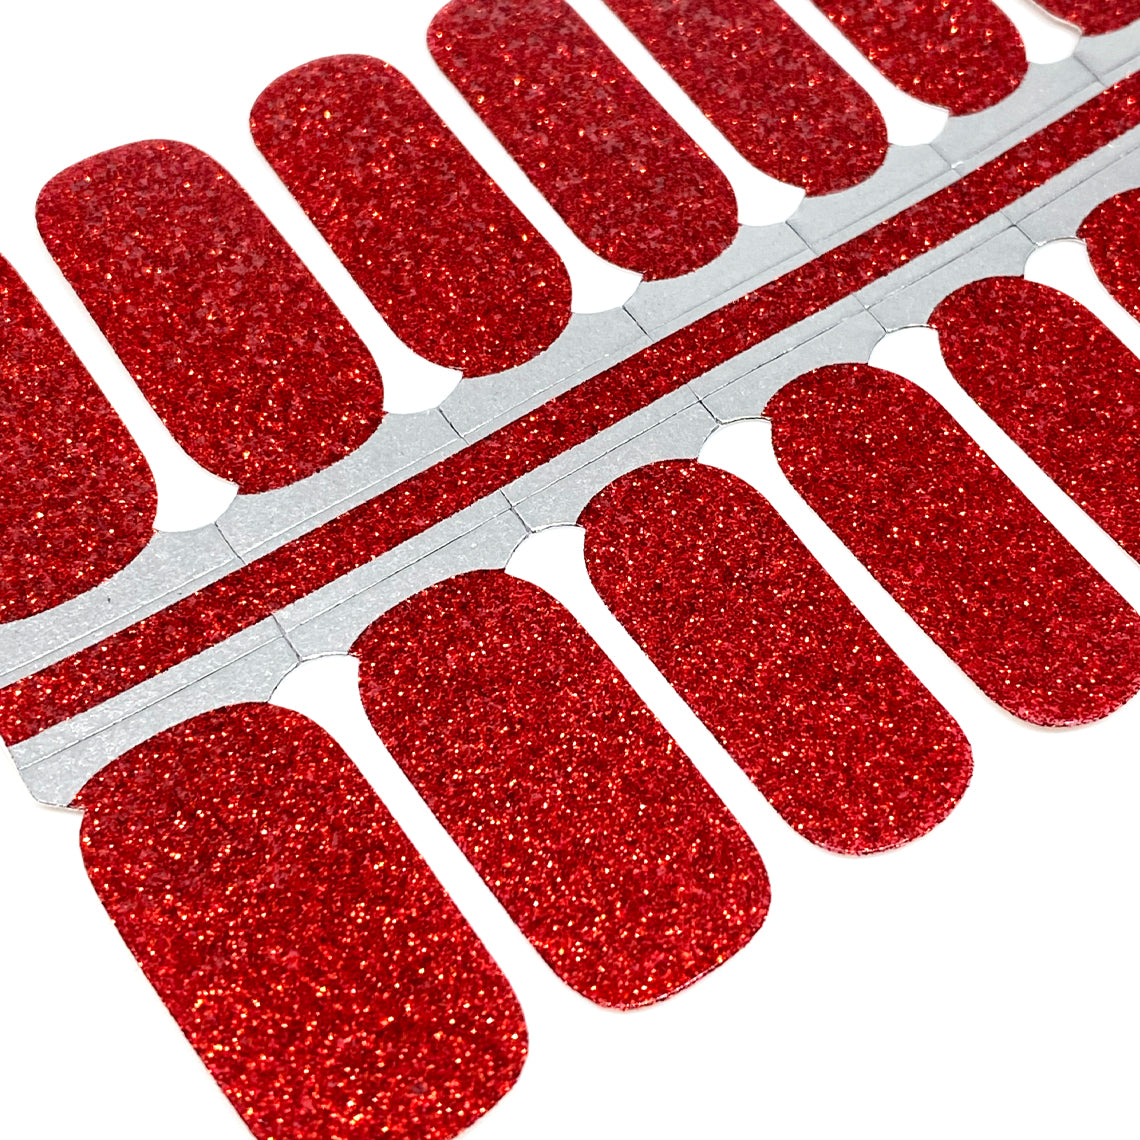 Red Glitter Nail Wraps